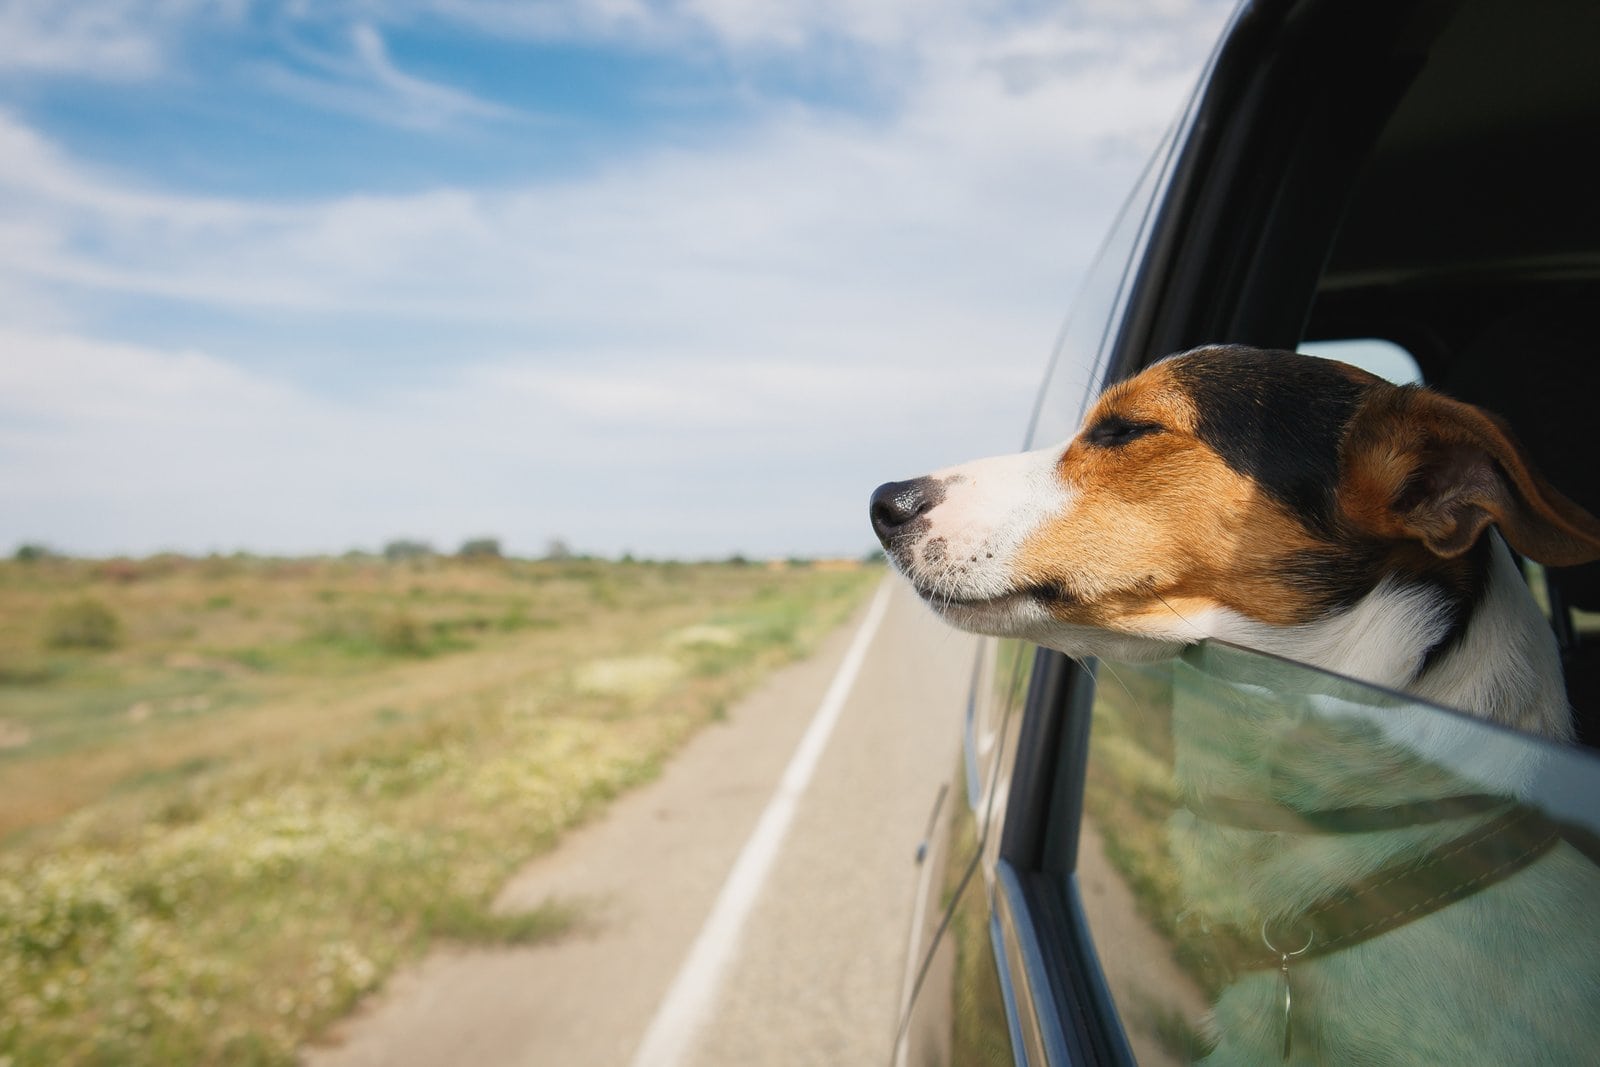 Keep your dog safe in the car